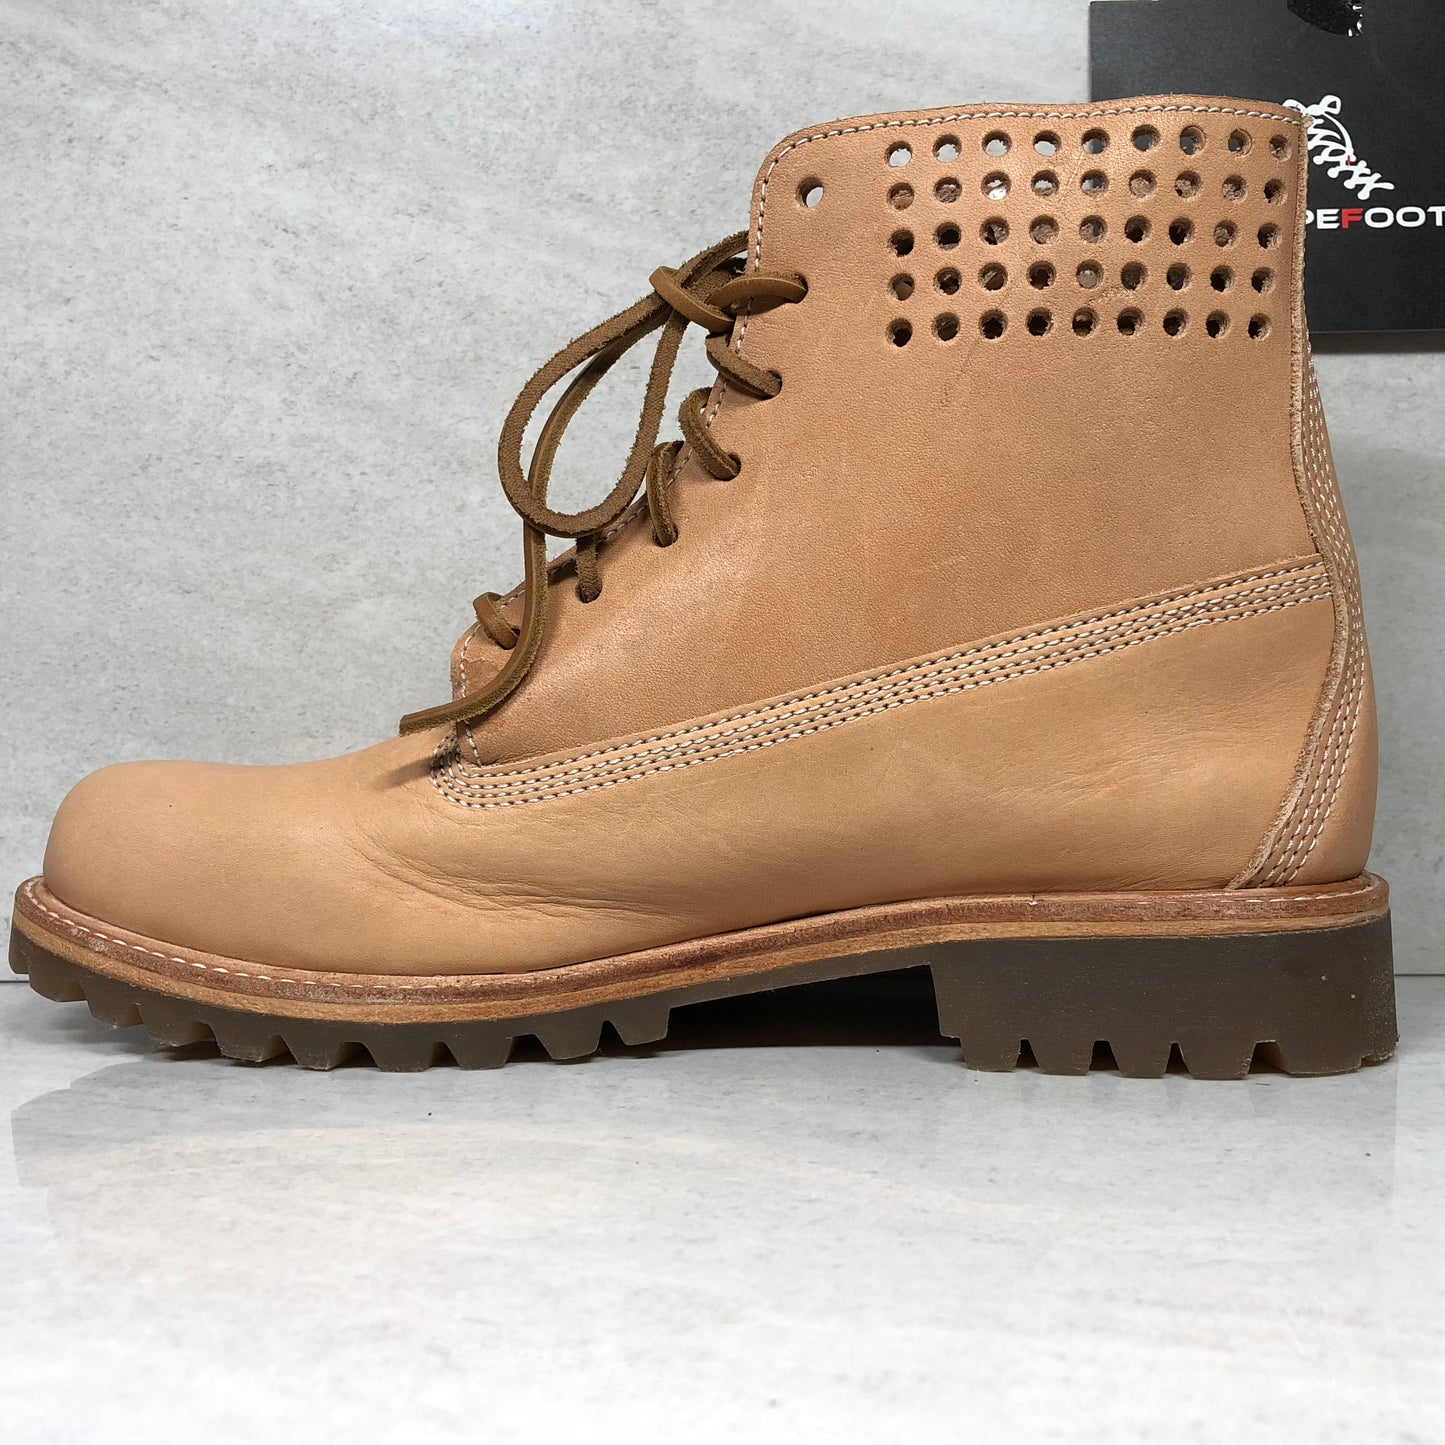 DS Timberland 6" Premium Perforated Veg Tan Taille 10.5 Cuir Horween TB0A1BBJ